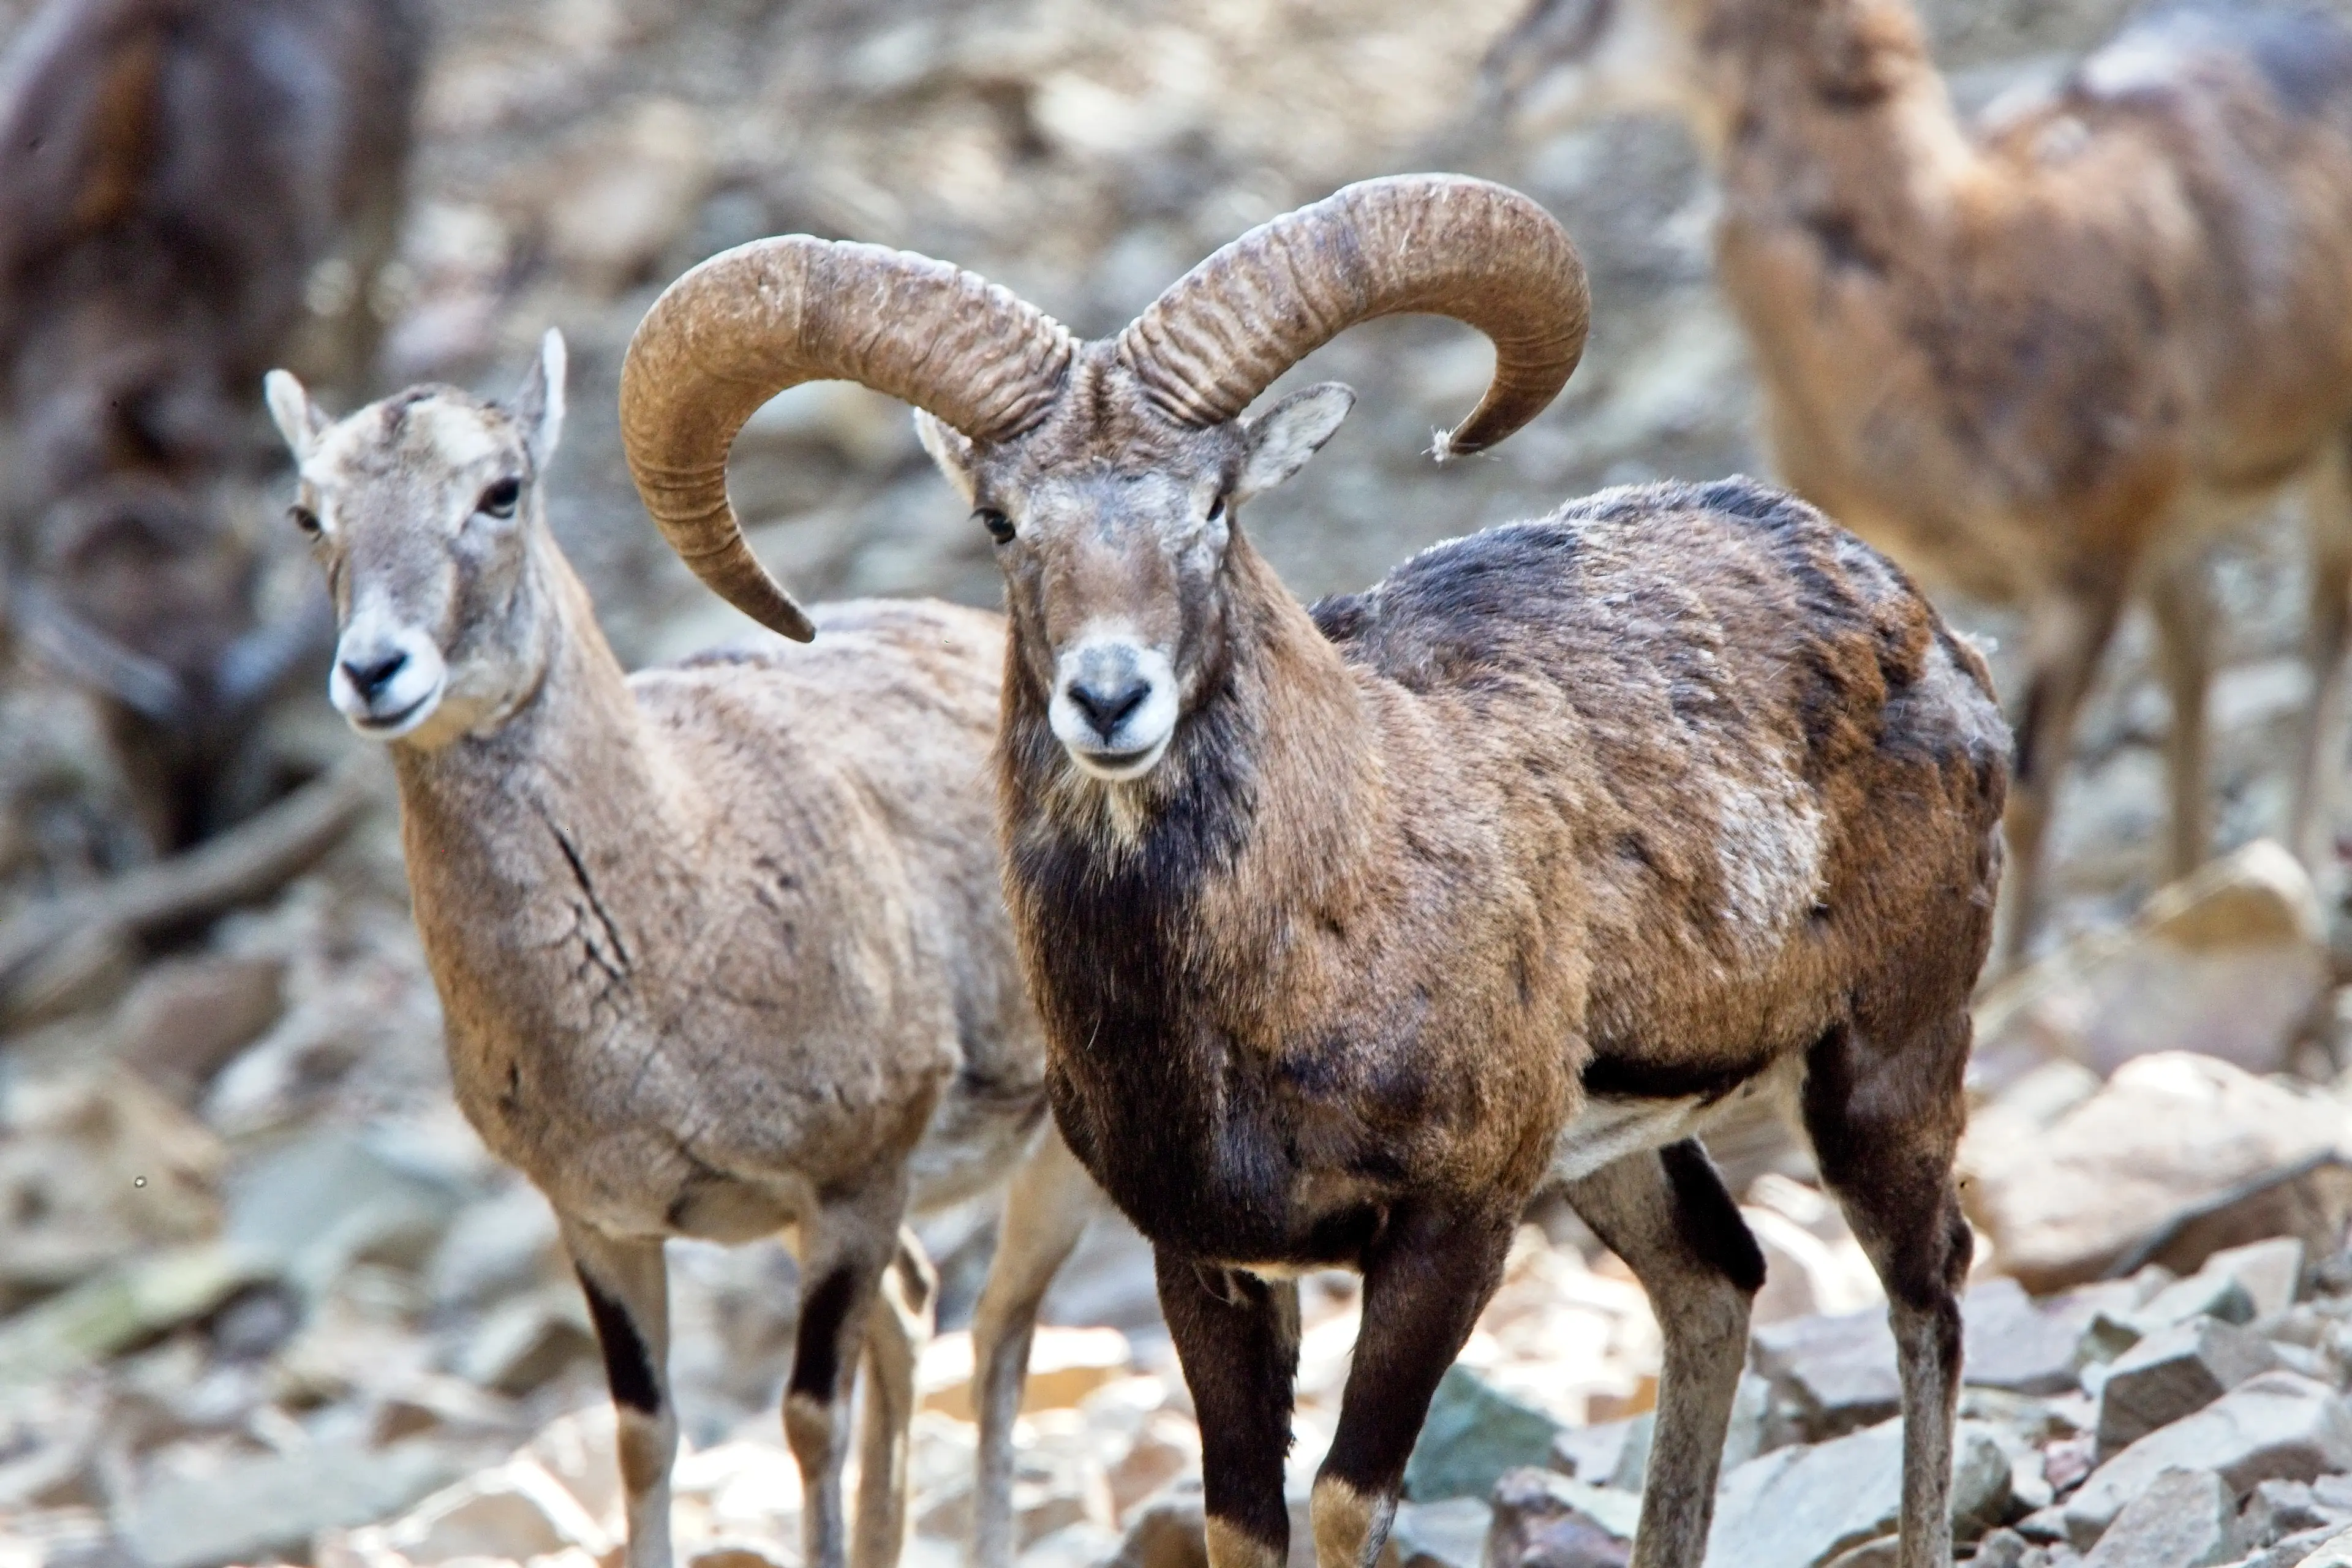 A pair of moufflons, a species endemic to Cyprus